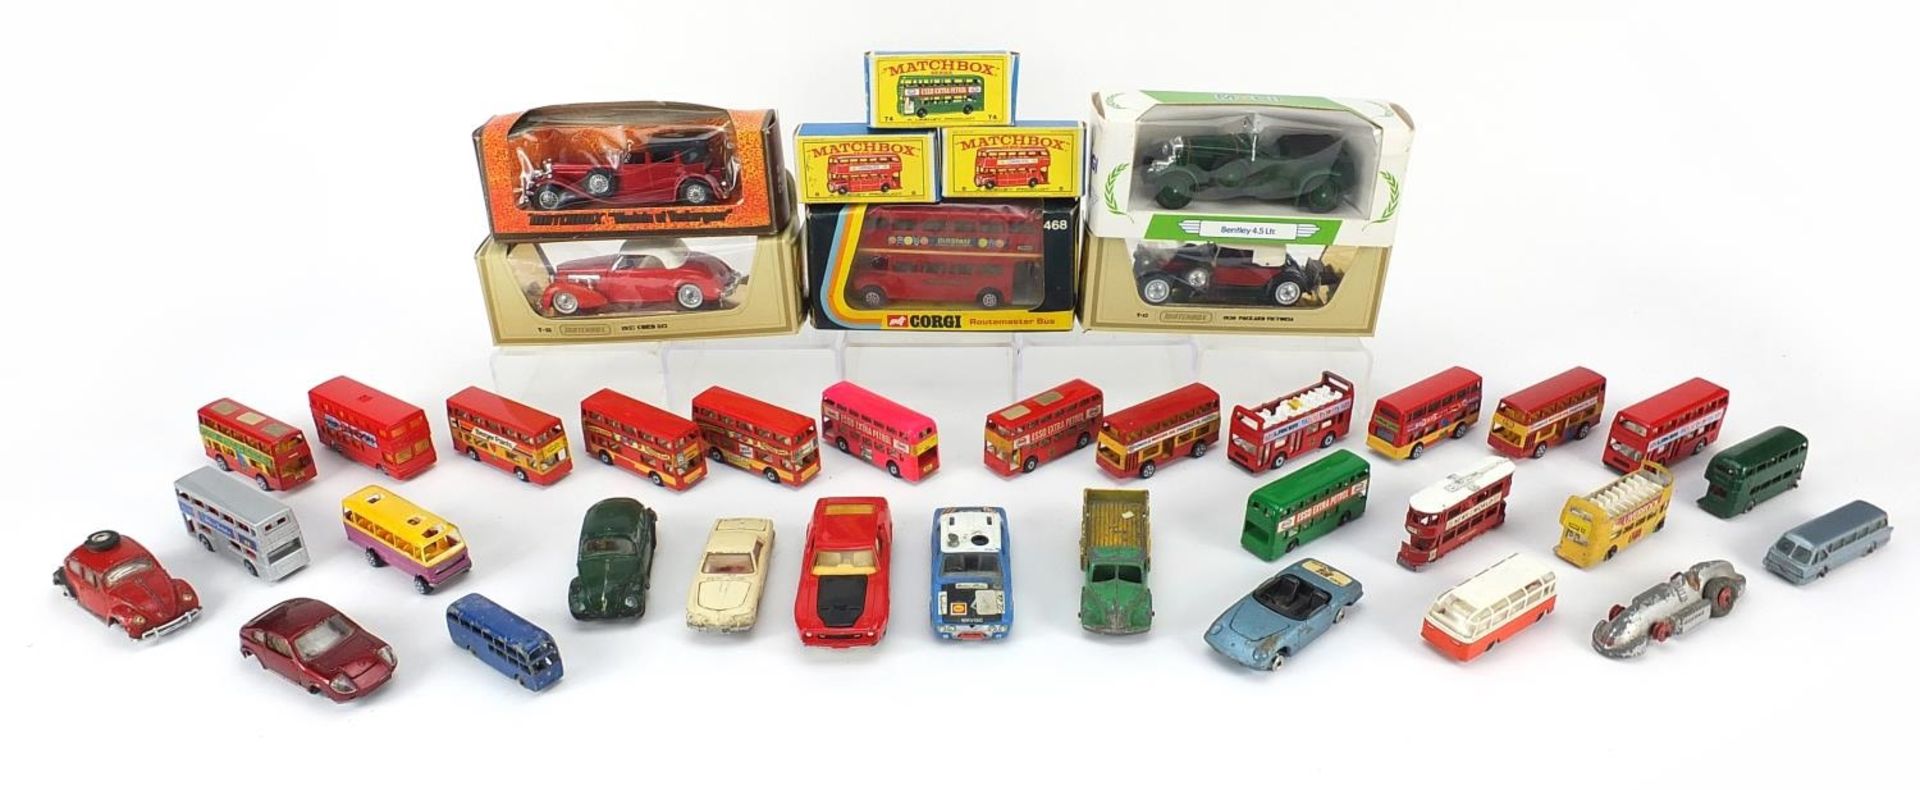 Vintage and later diecast model vehicles, some with boxes, including Dinky, Matchbox and Corgi